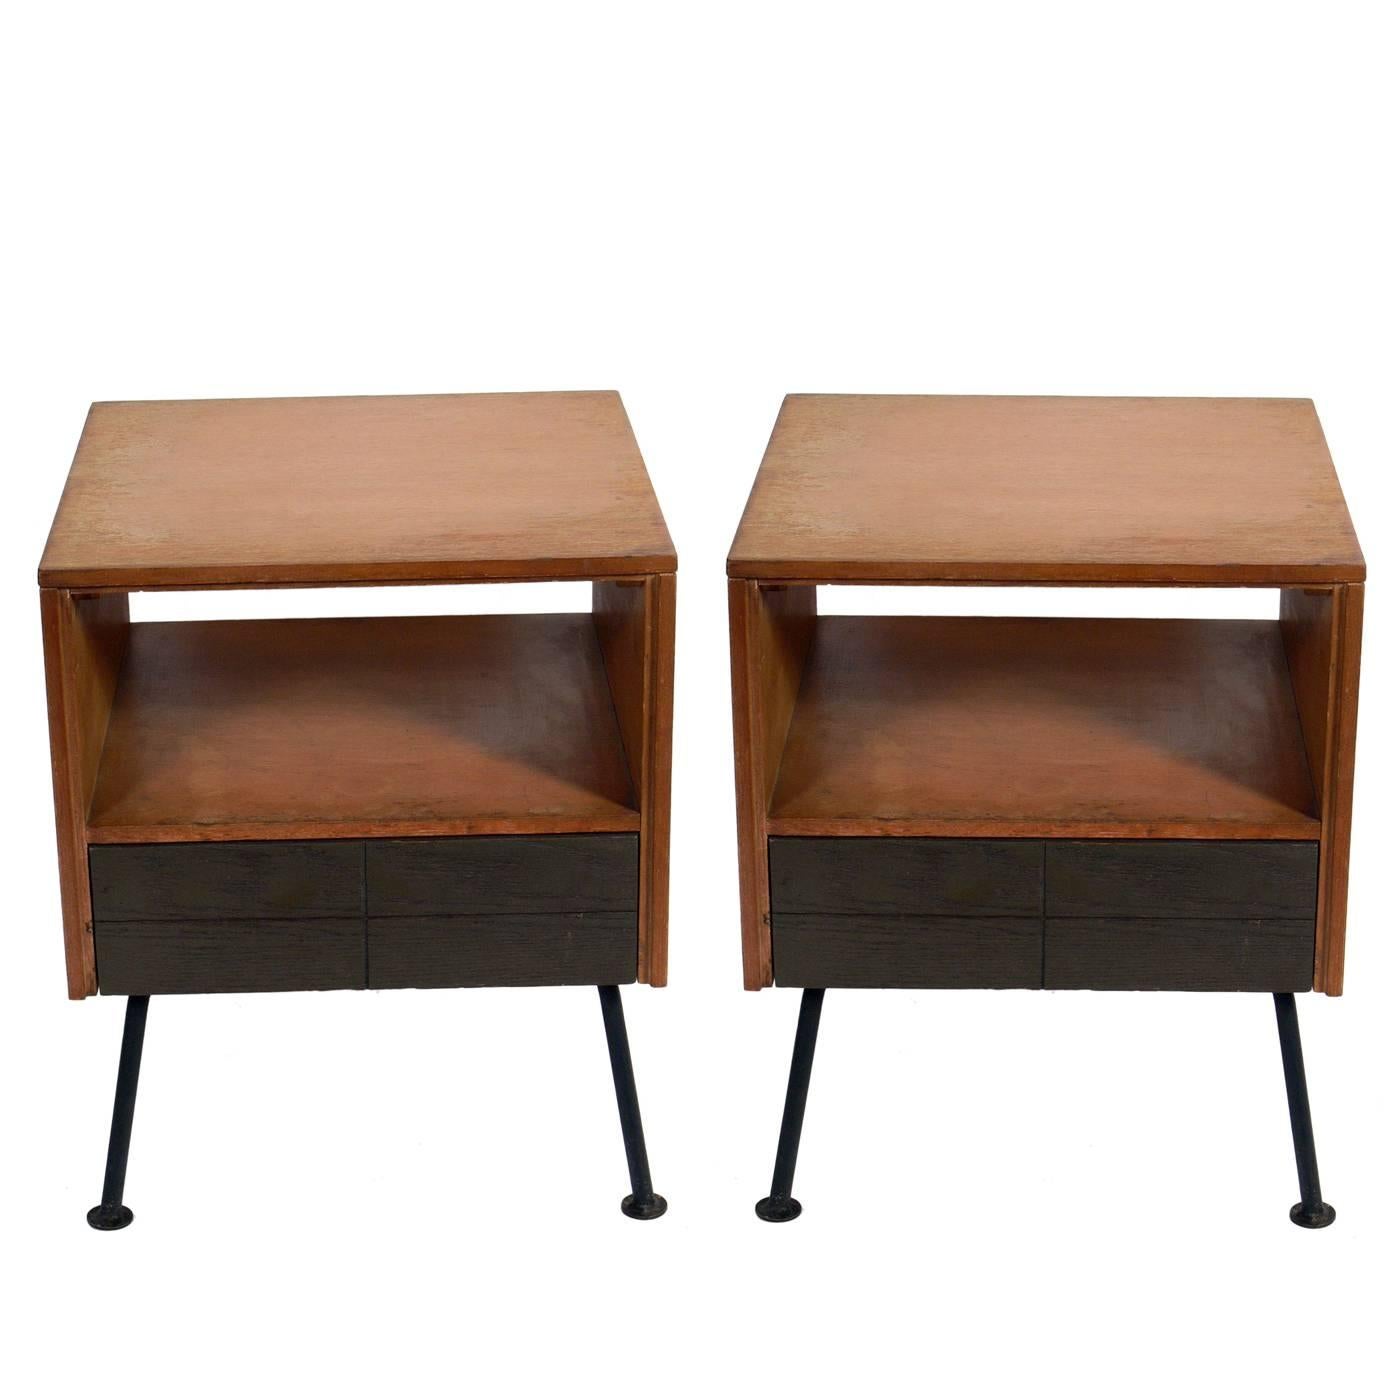 Pair of Clean Lined Nightstands or End Tables by Raymond Loewy